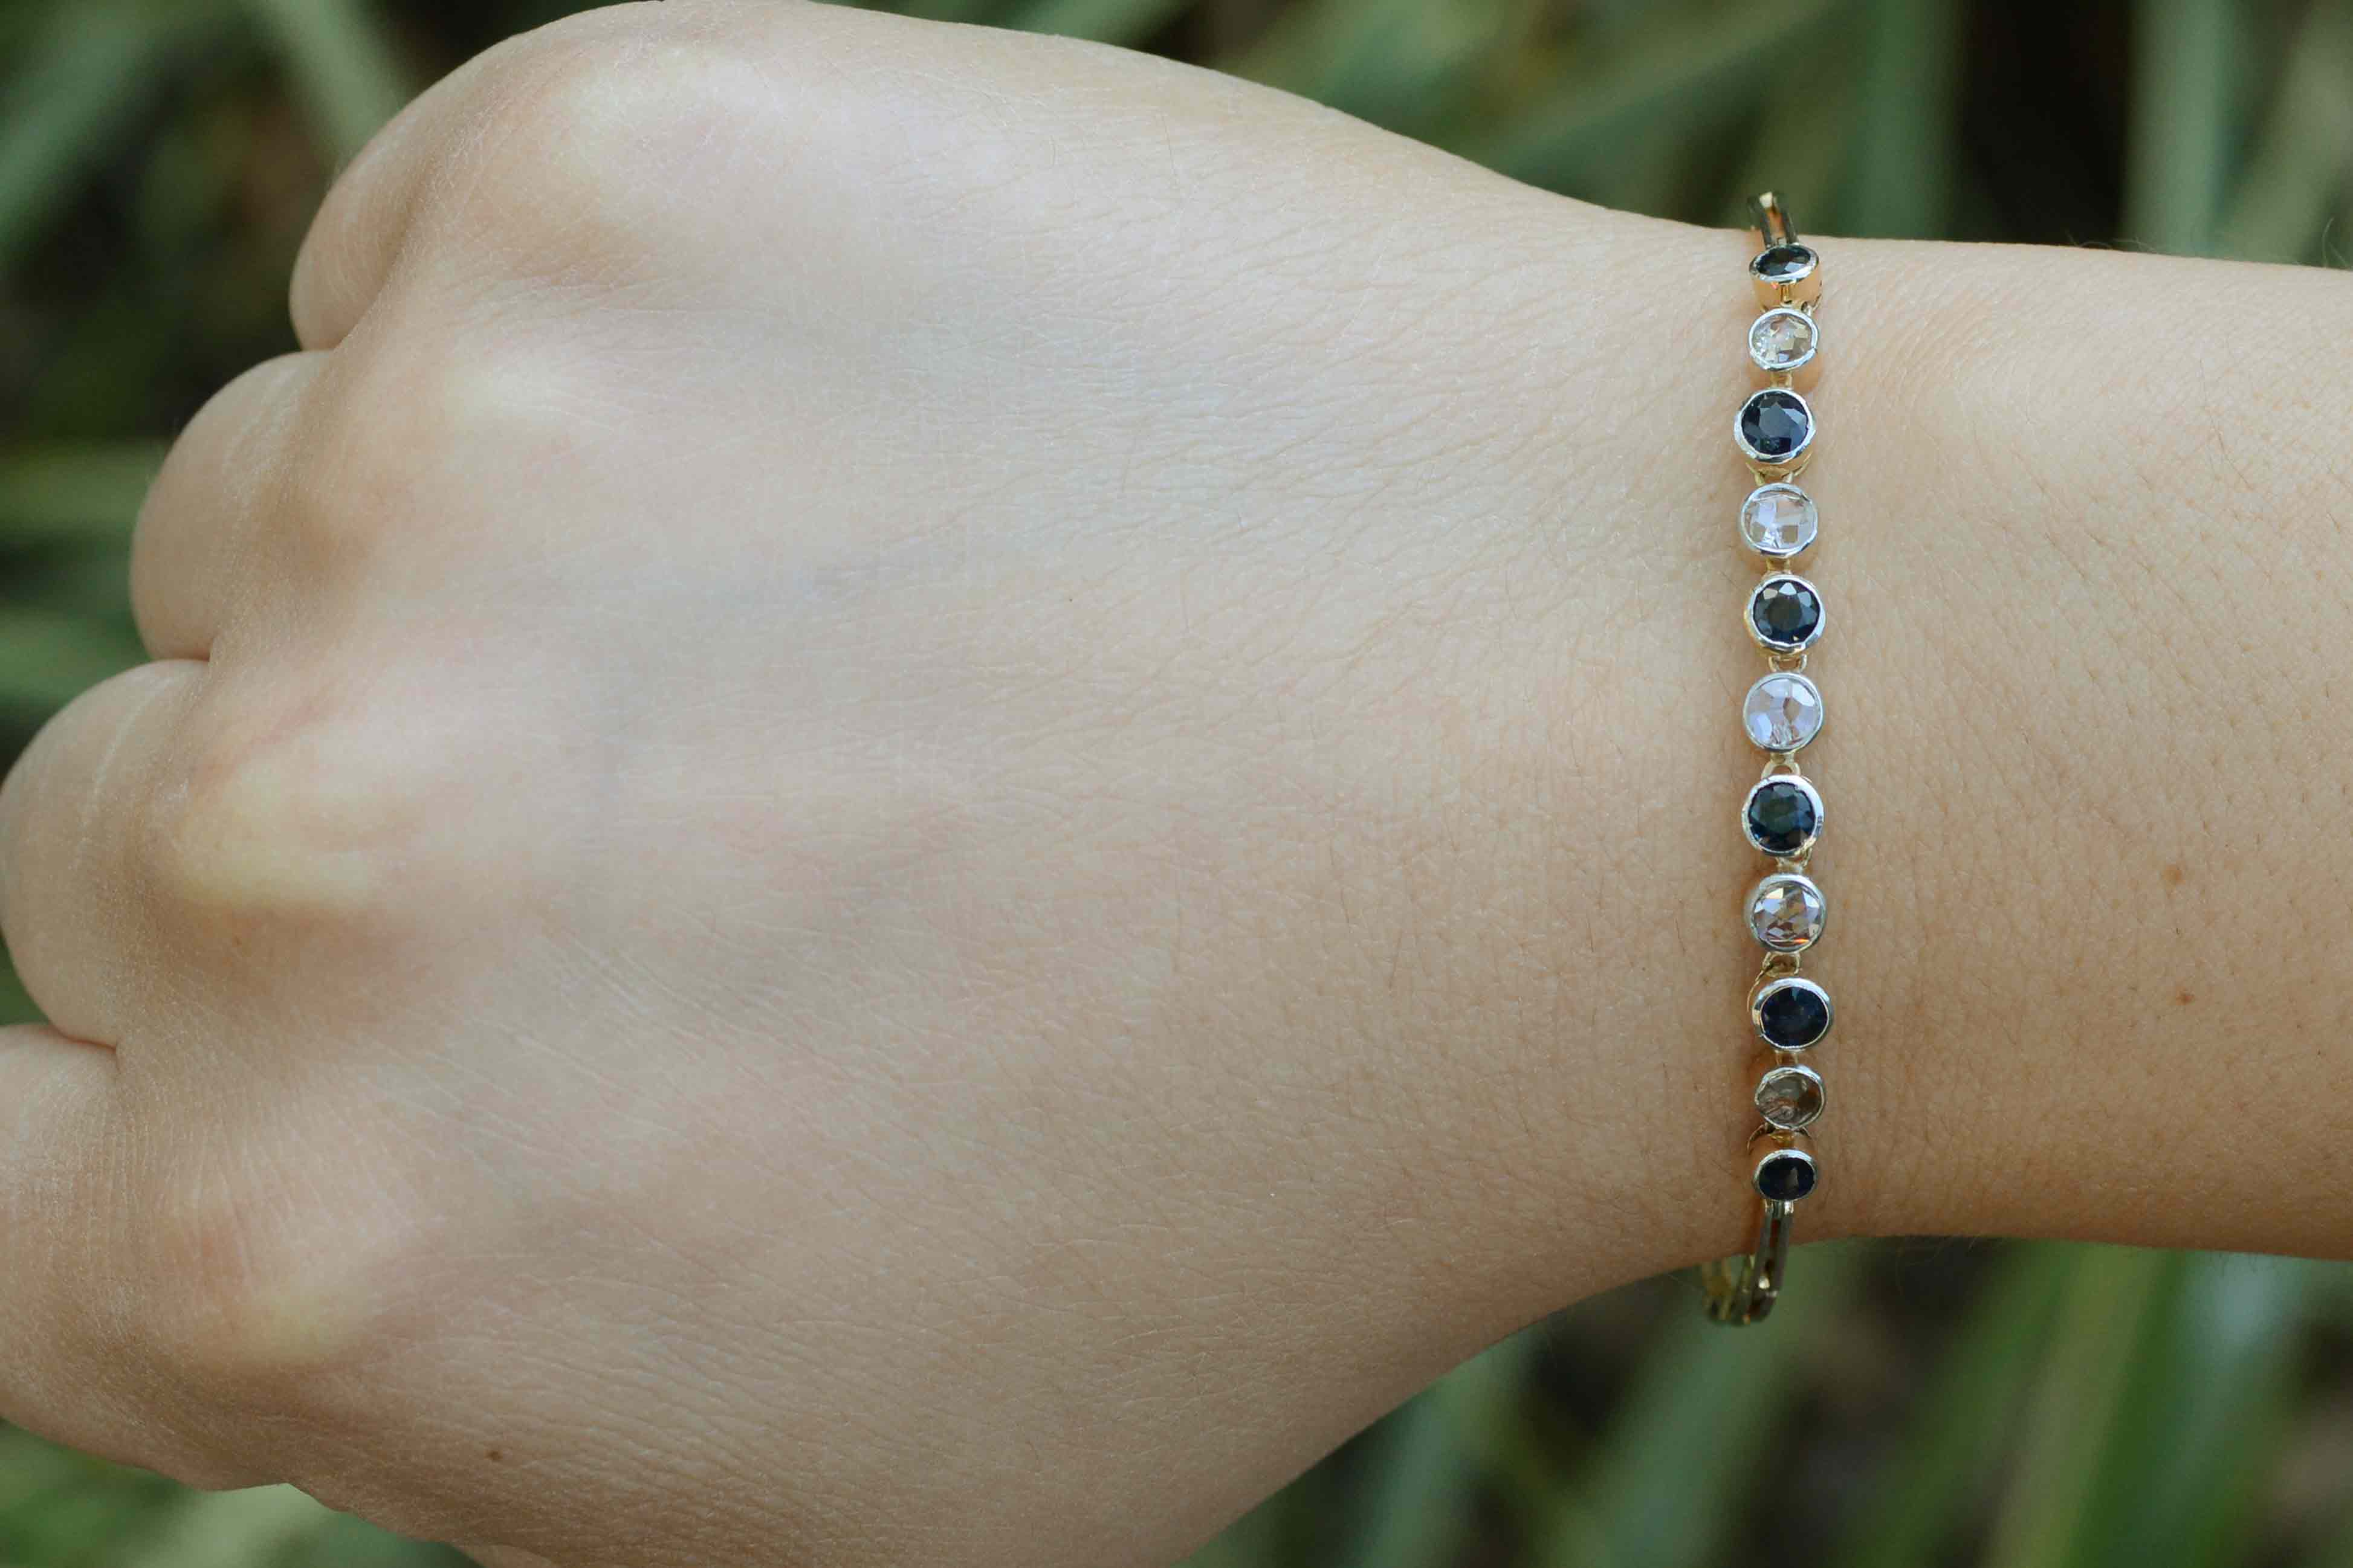 This stunning blue sapphire and diamond antique bracelet fits a 7 inch wrist.